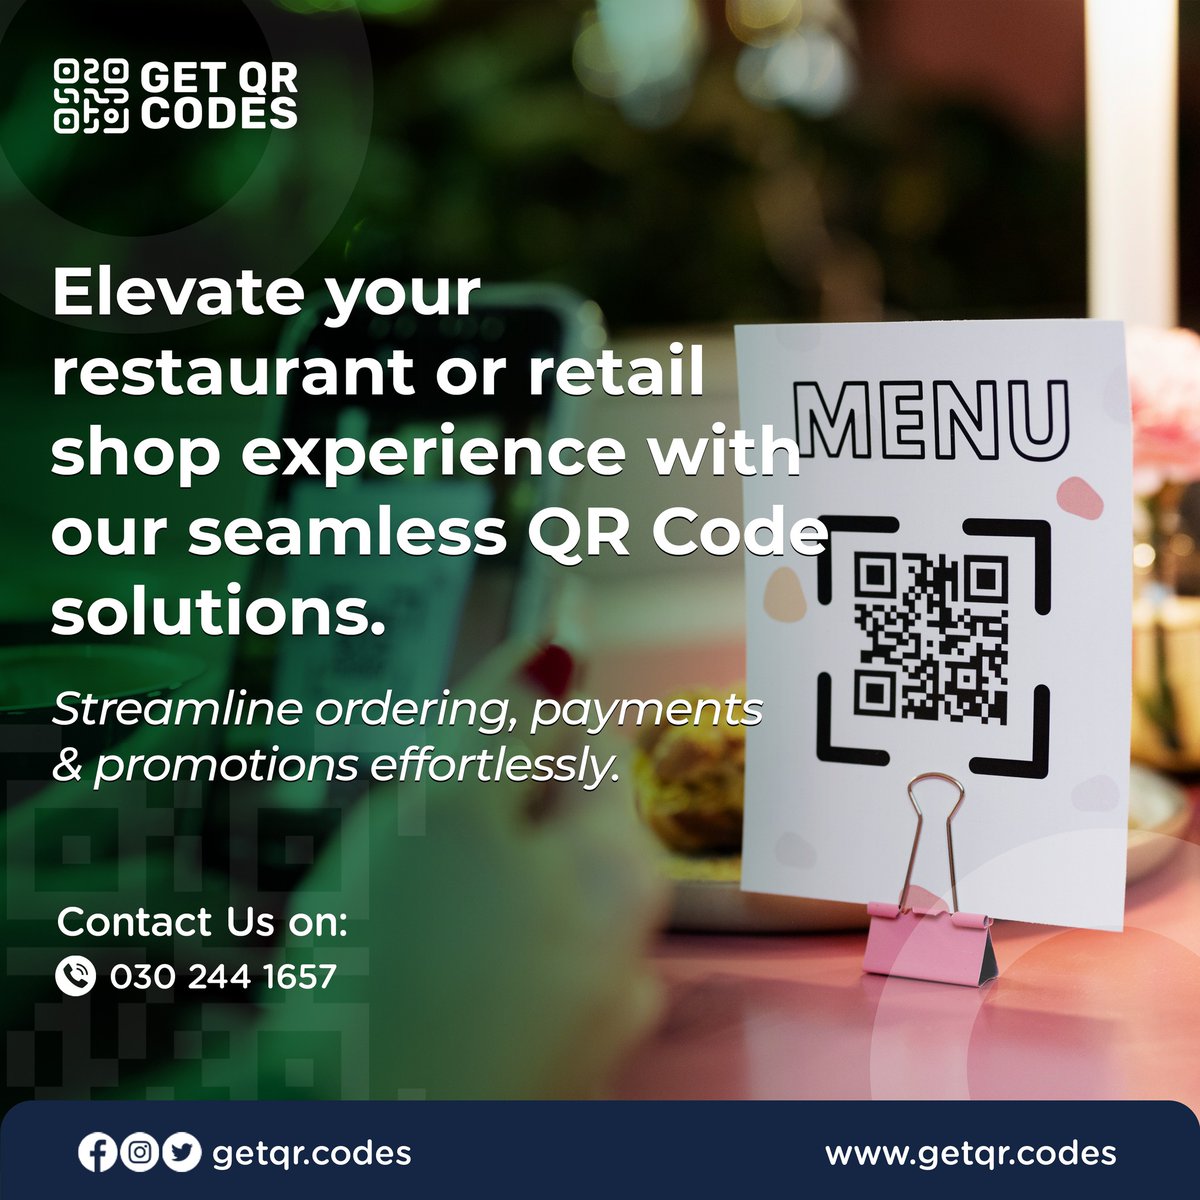 #QRCodeSolutions

Elevate your restaurant or retail shop experience with our seamless QR Code solutions.

Streamline ordering, payments, and promotions effortlessly.

Call us now .
Tel : 0591447845

#GetQRCodes #QRCodes #Tech #business #Solutions #businesssolutions #business